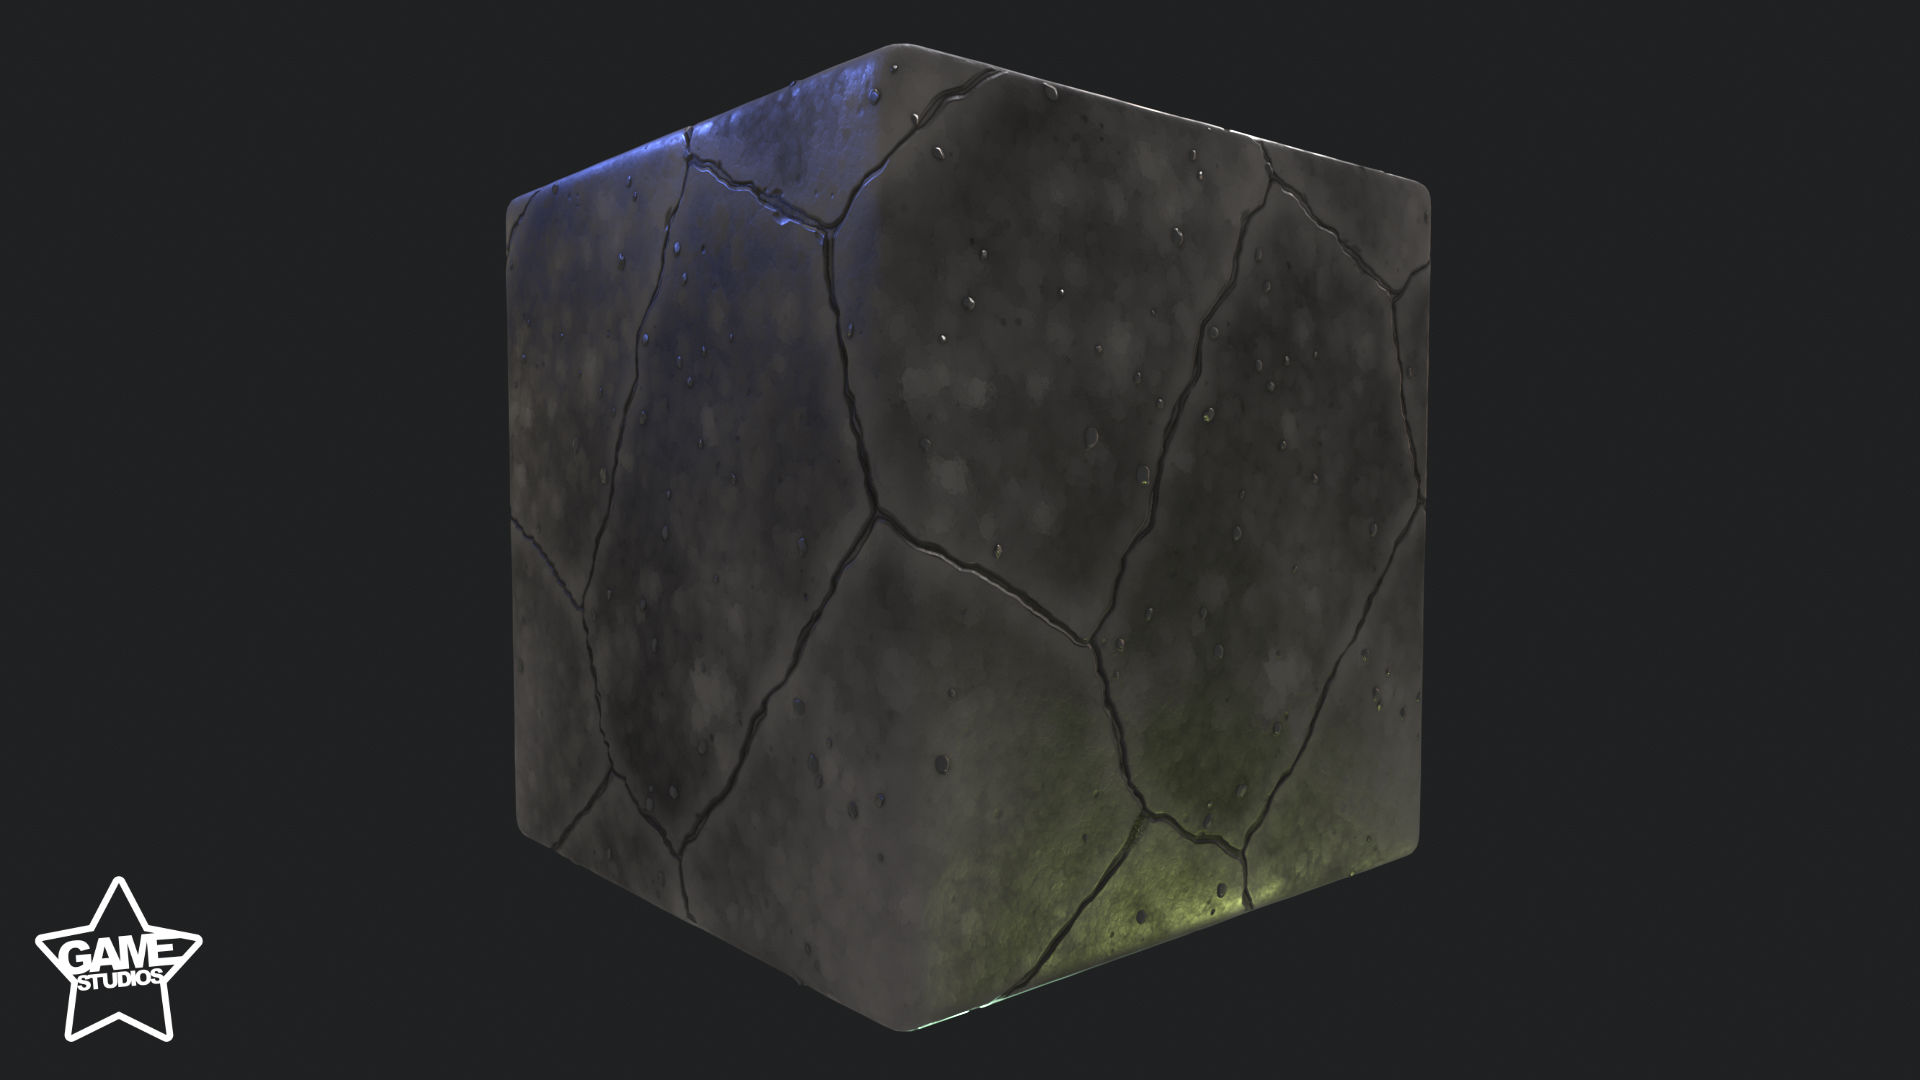 Stylized Cracked Concrete material